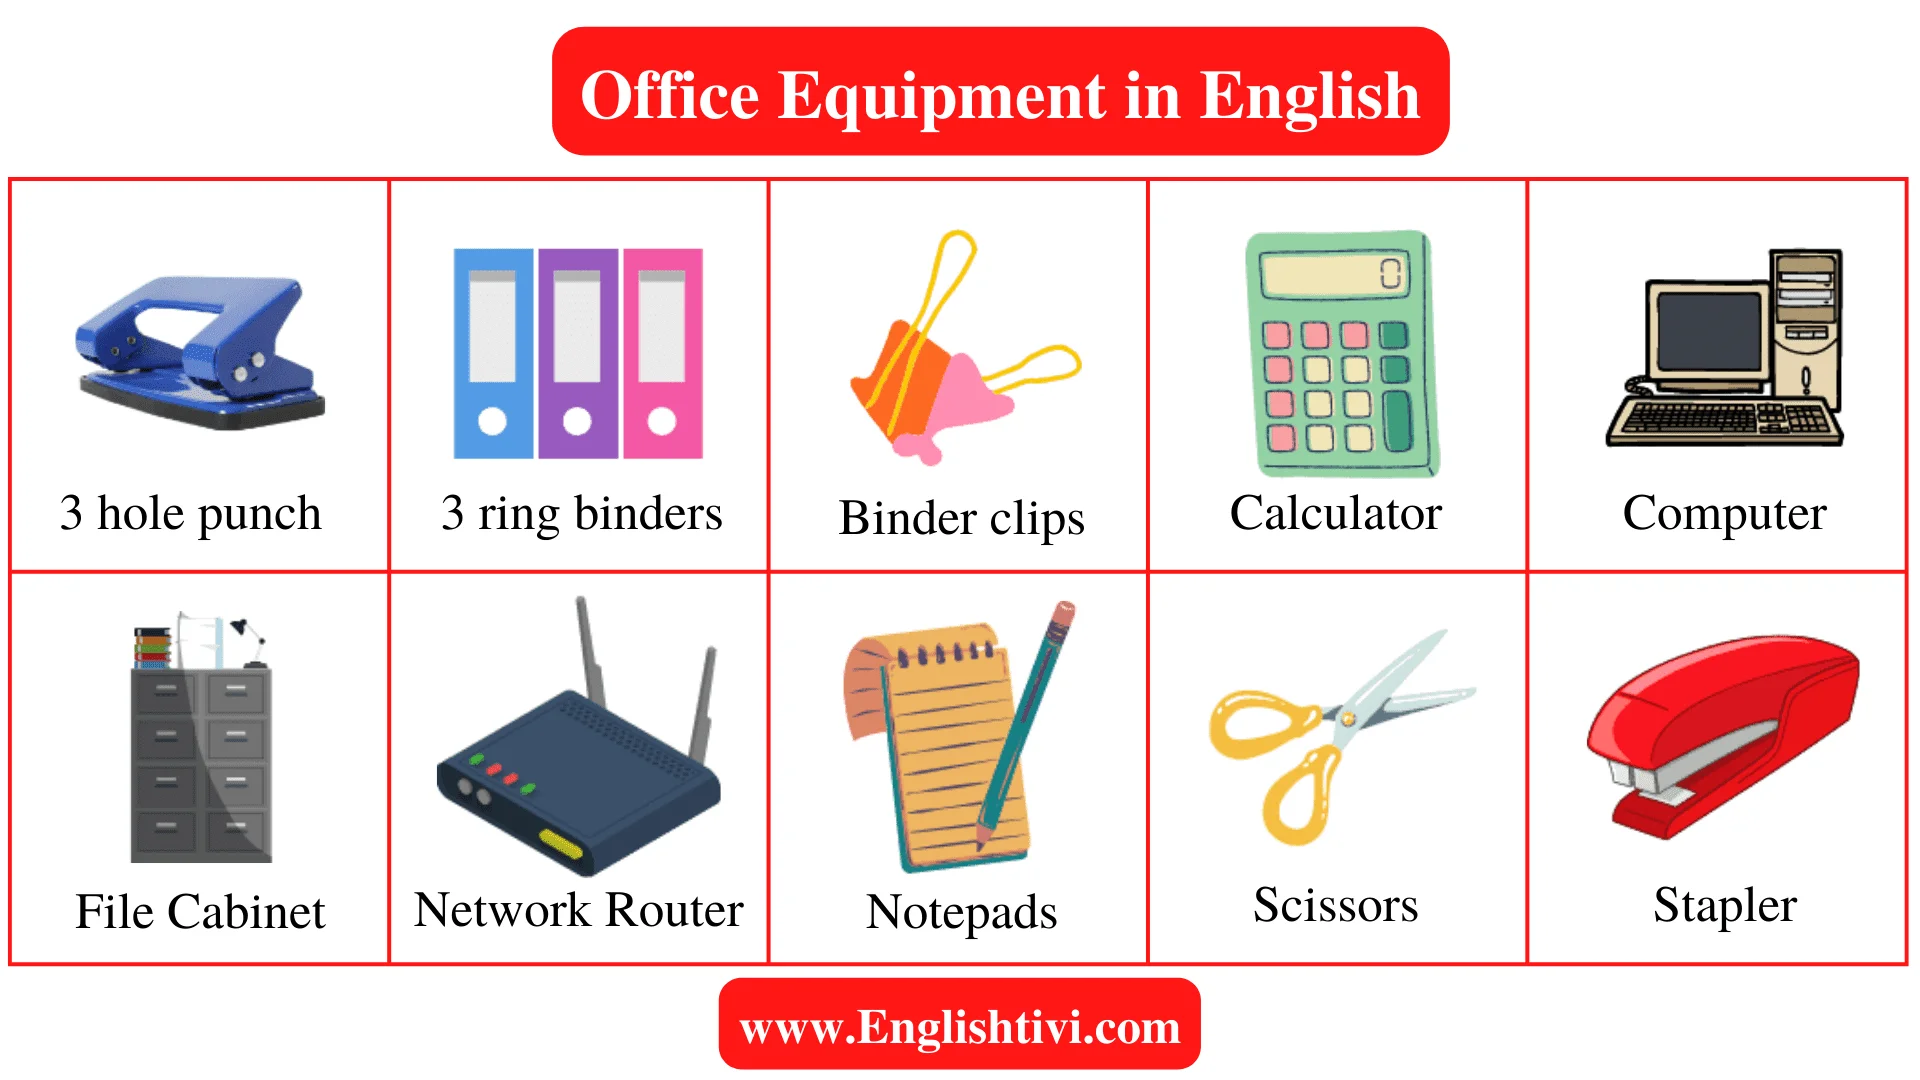 Office Equipment in English With Pictures - Englishtivi